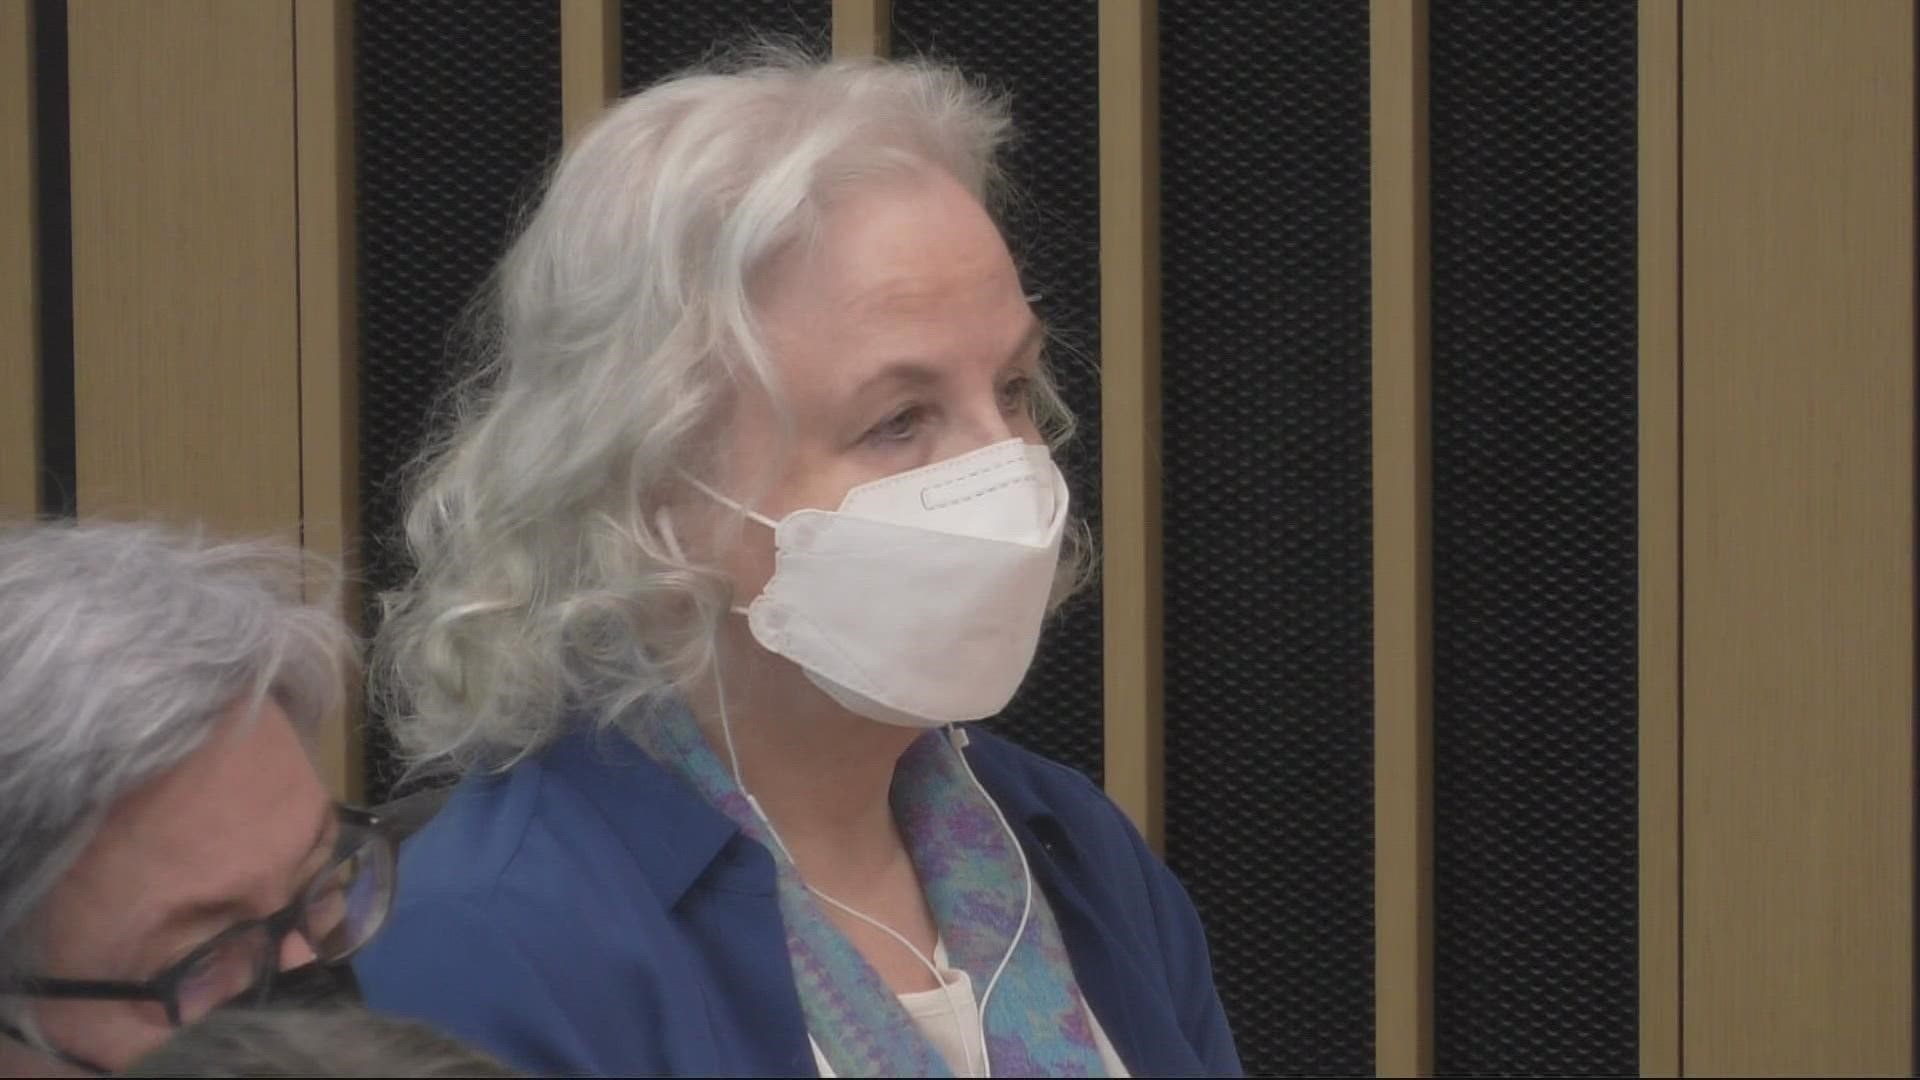 Brophy is accused of shooting and killing her husband in 2018. Her defense team began wrapping up their case on Monday.